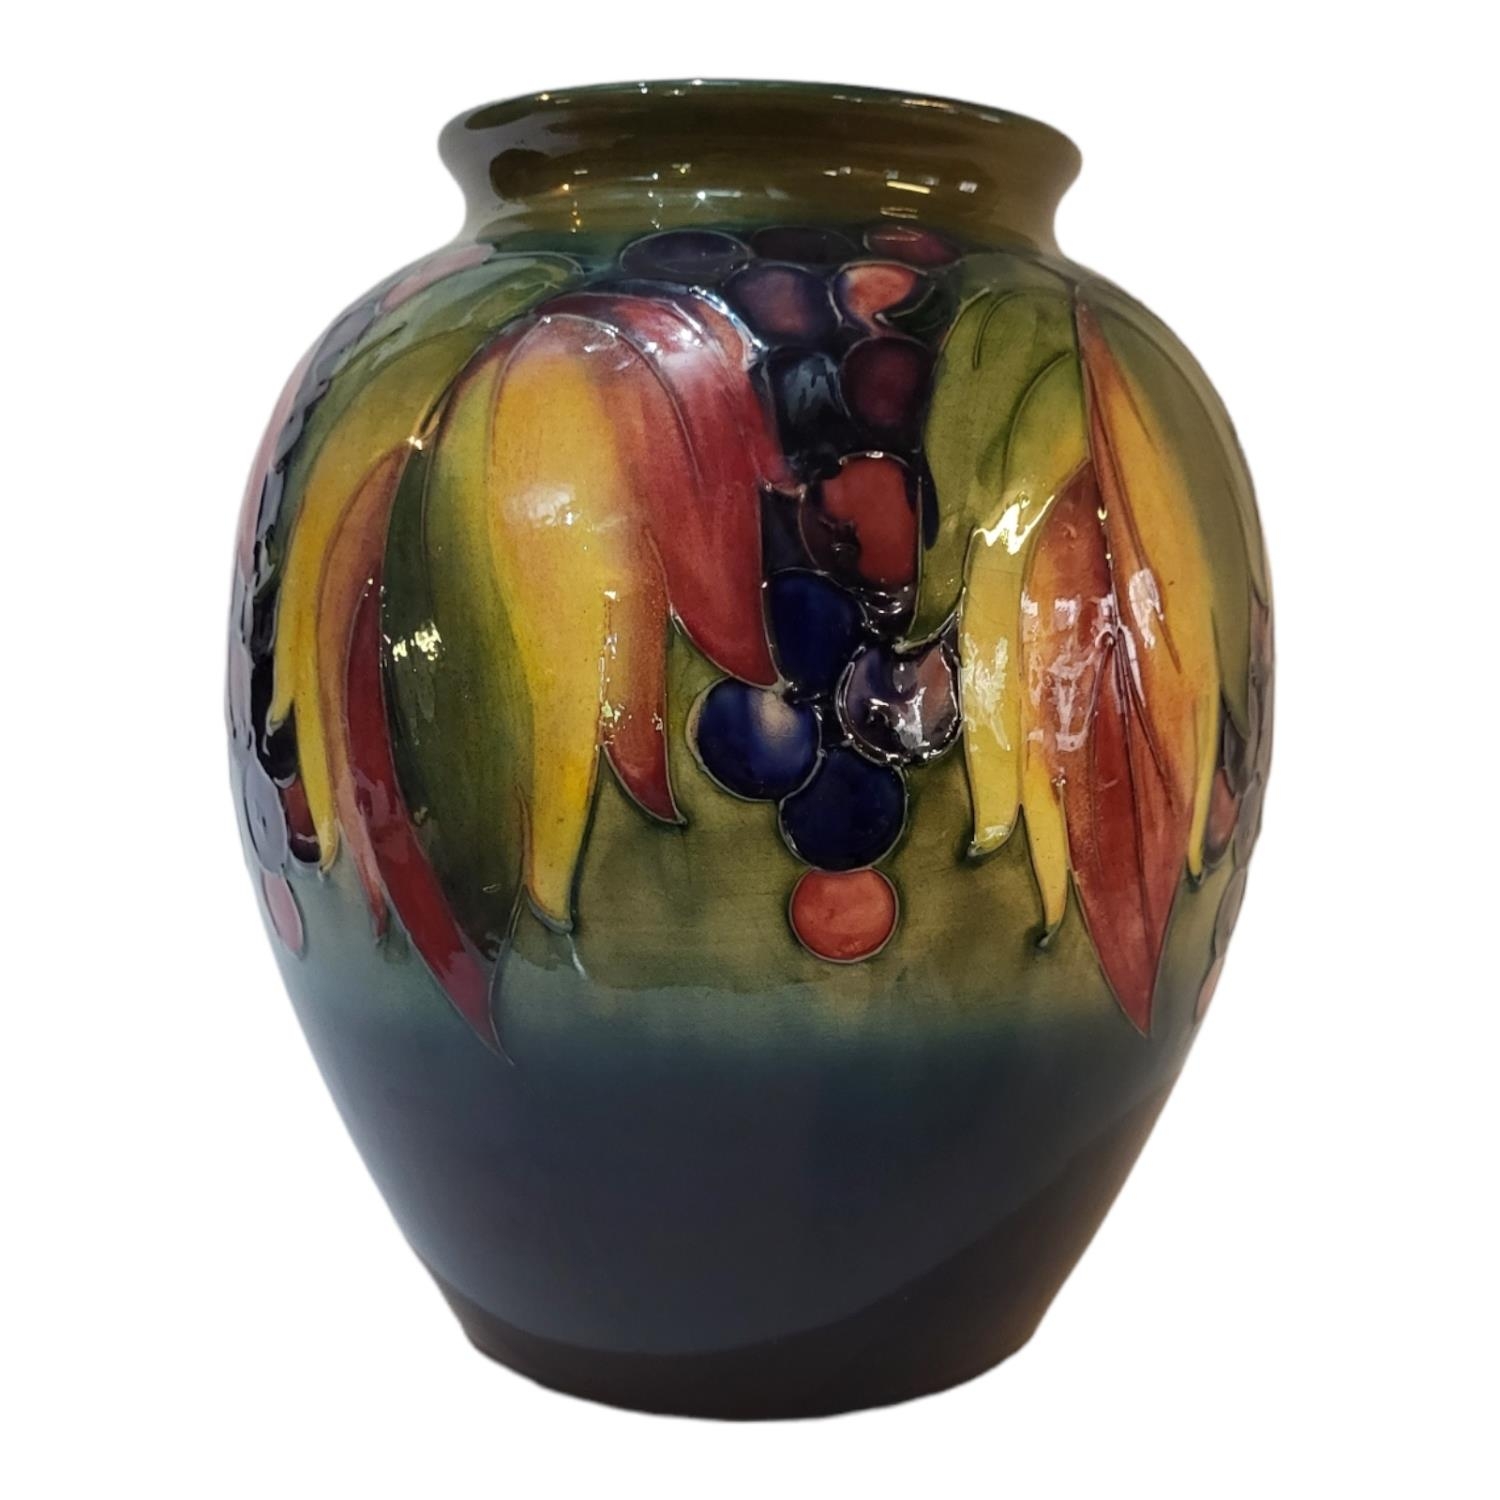 A LARGE ART DECO PERIOD WILLIAM MOORCROFT POTTERY EXHIBITION SIZE OVOID VASE With everted rim,